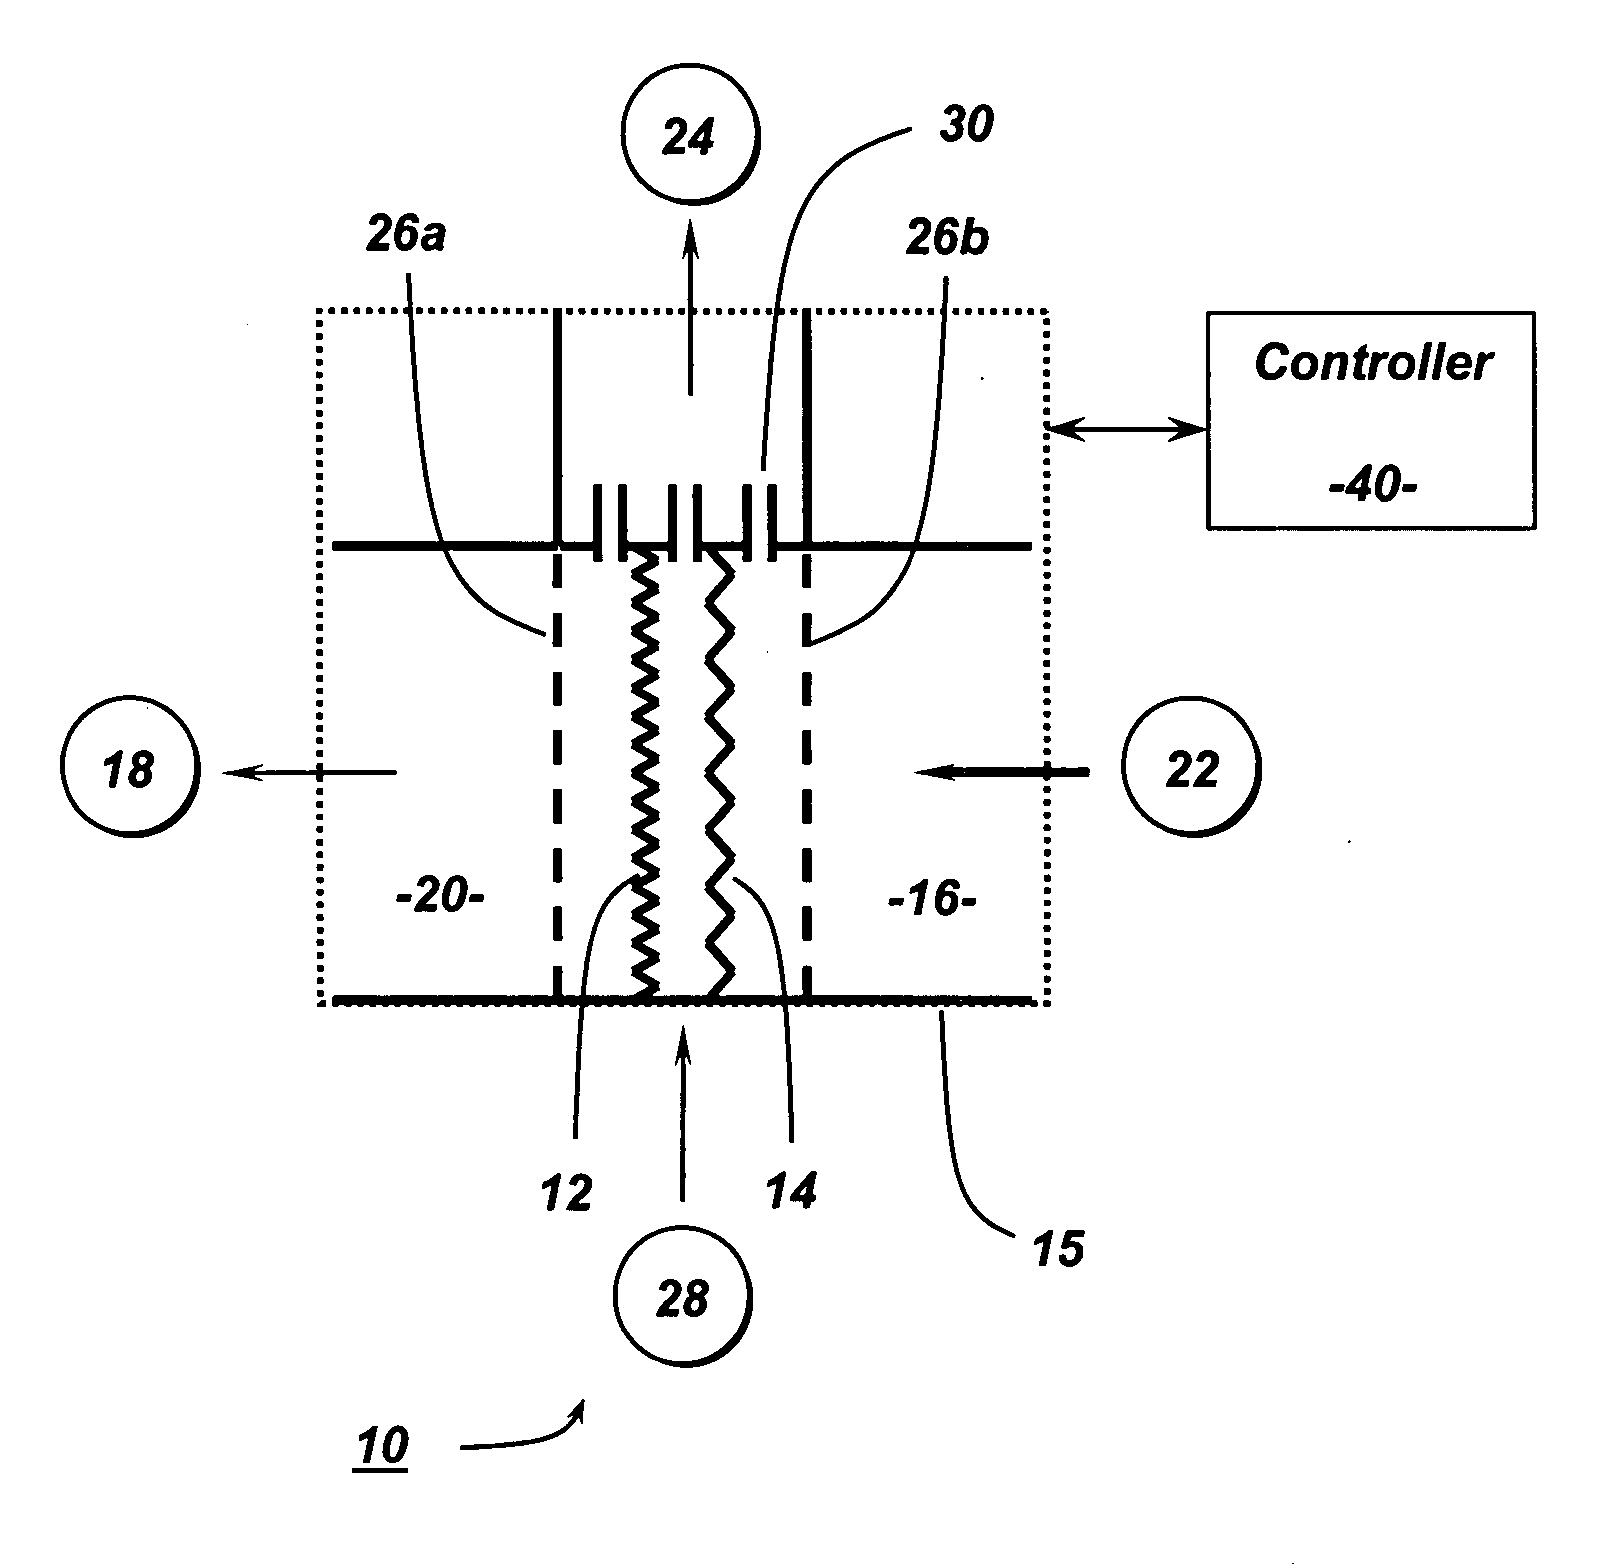 Hand-held trace vapor/particle sampling system